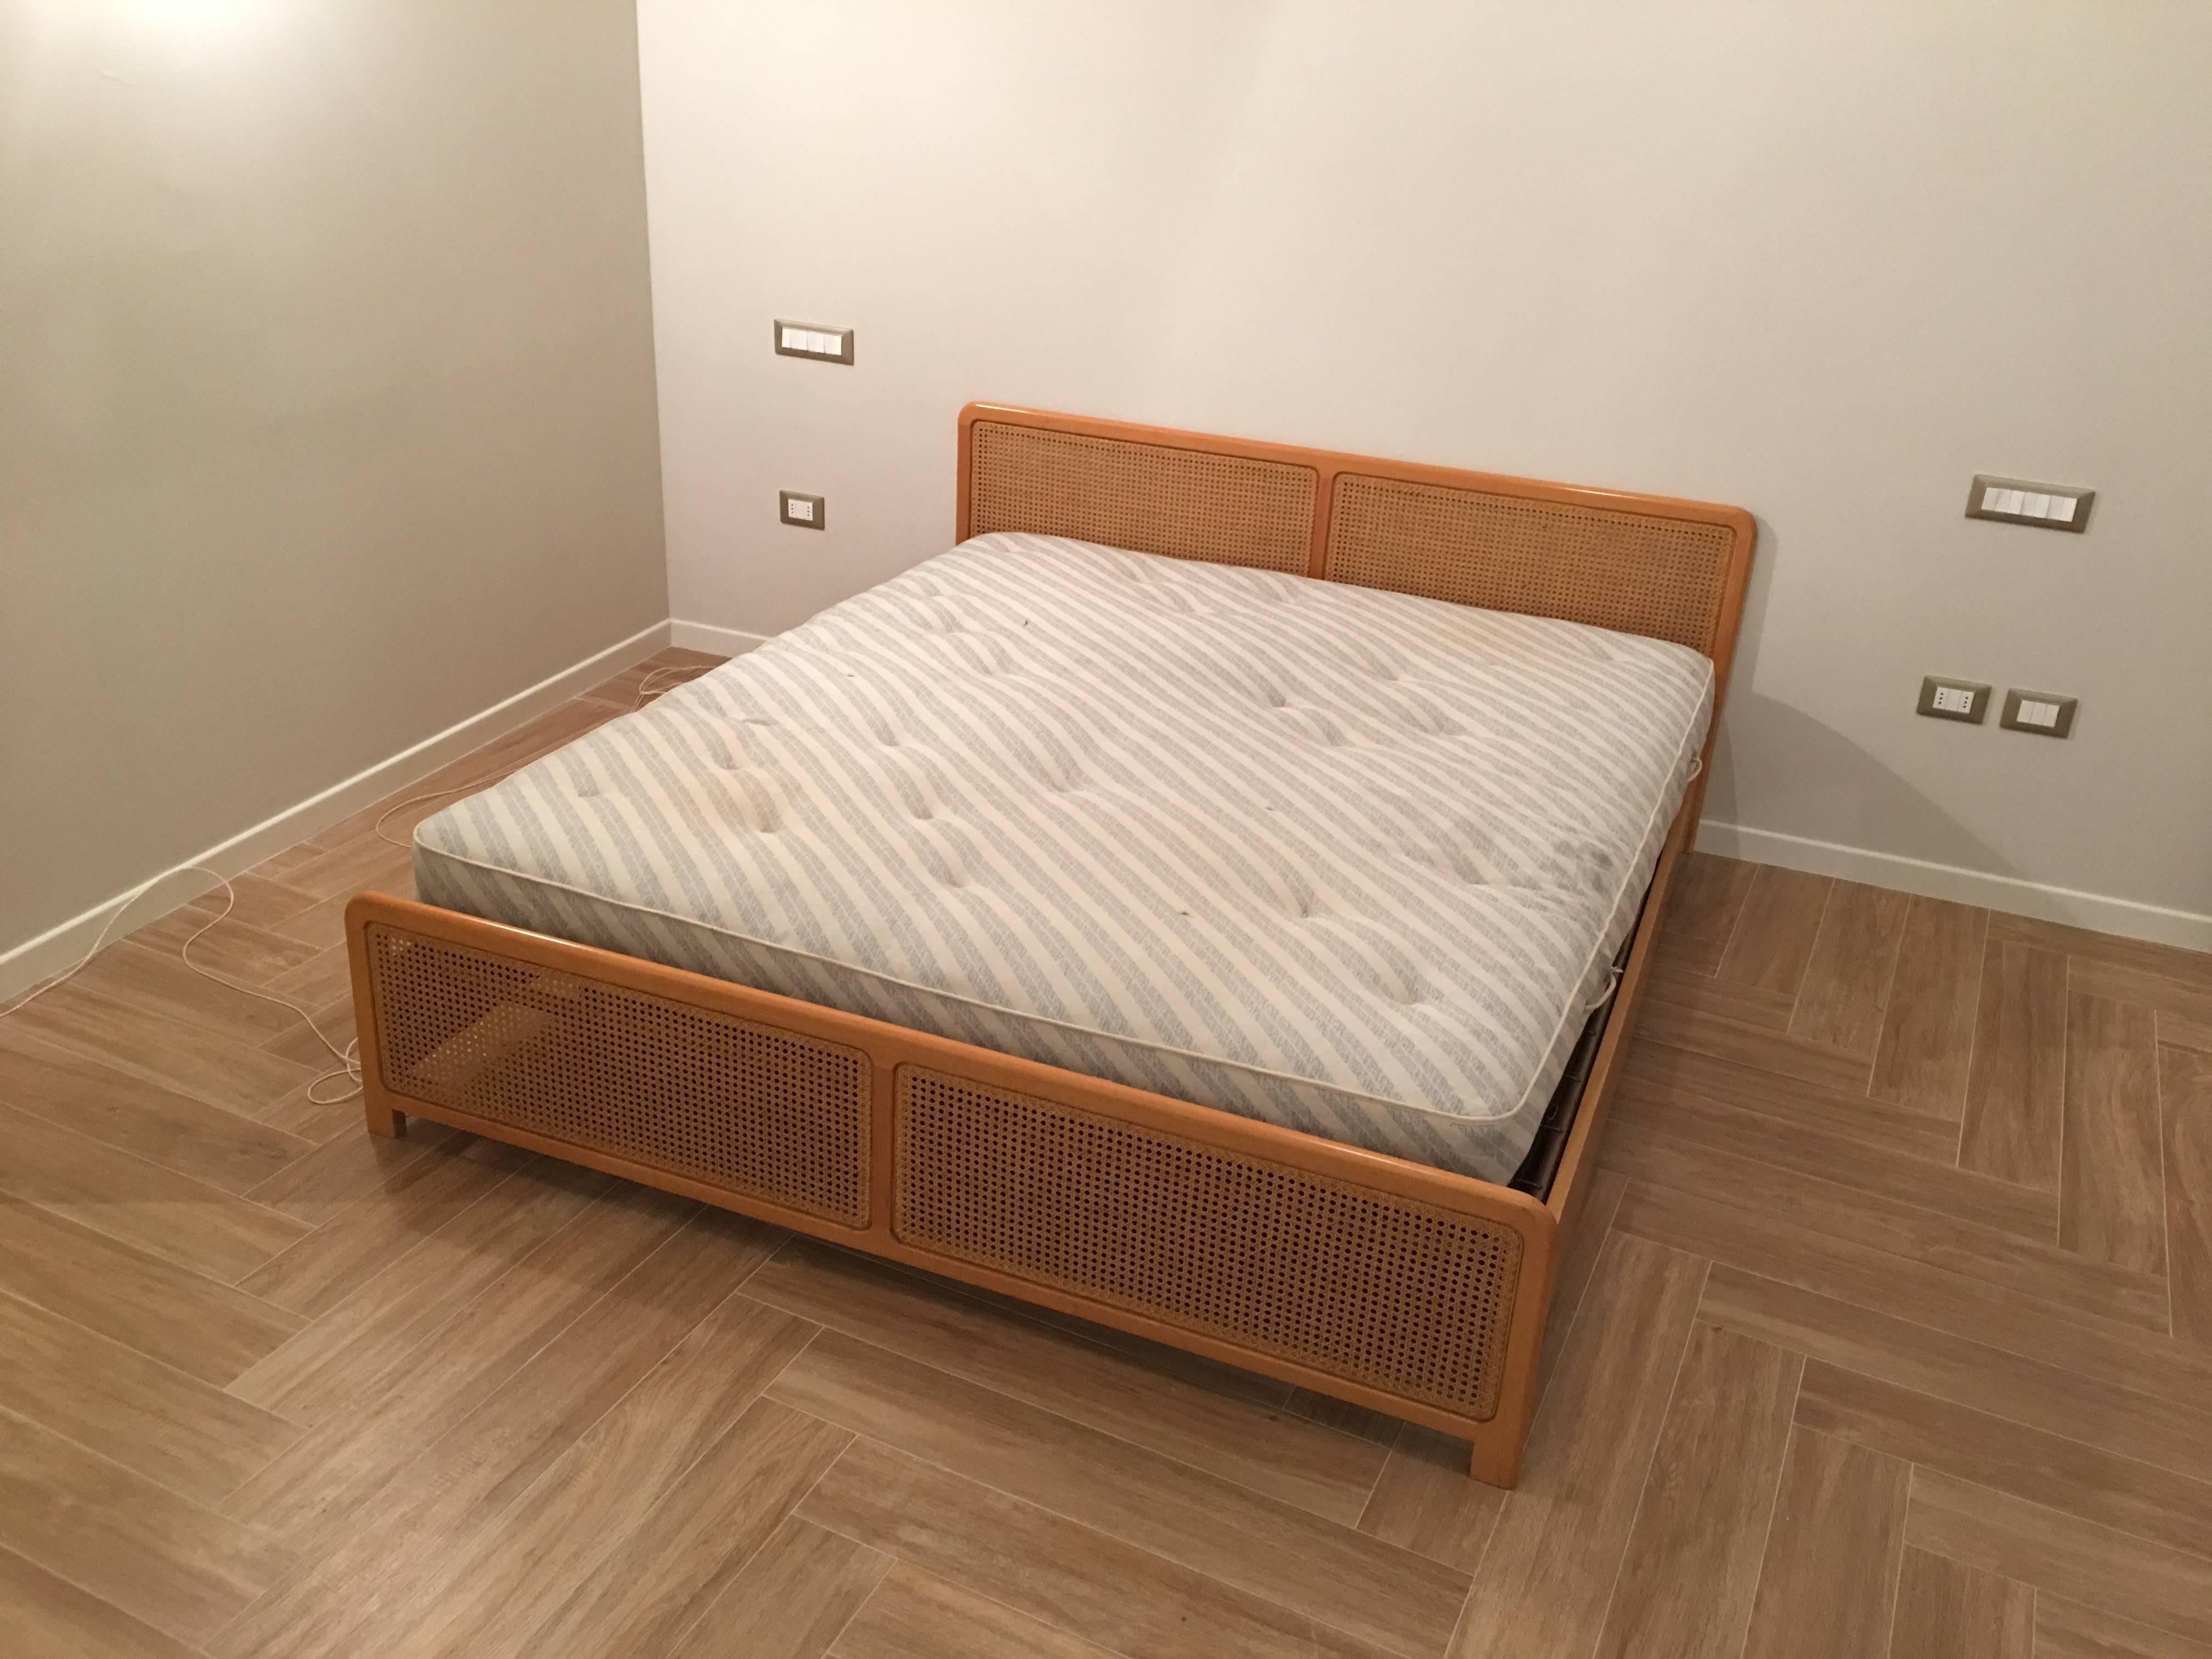 Lovely light color wood caned bed frame in perfect condition.
Disassembled easily for a cheaper transportation, ask for prices disassembled, please.
Beautiful bed compatible with every interior and style.